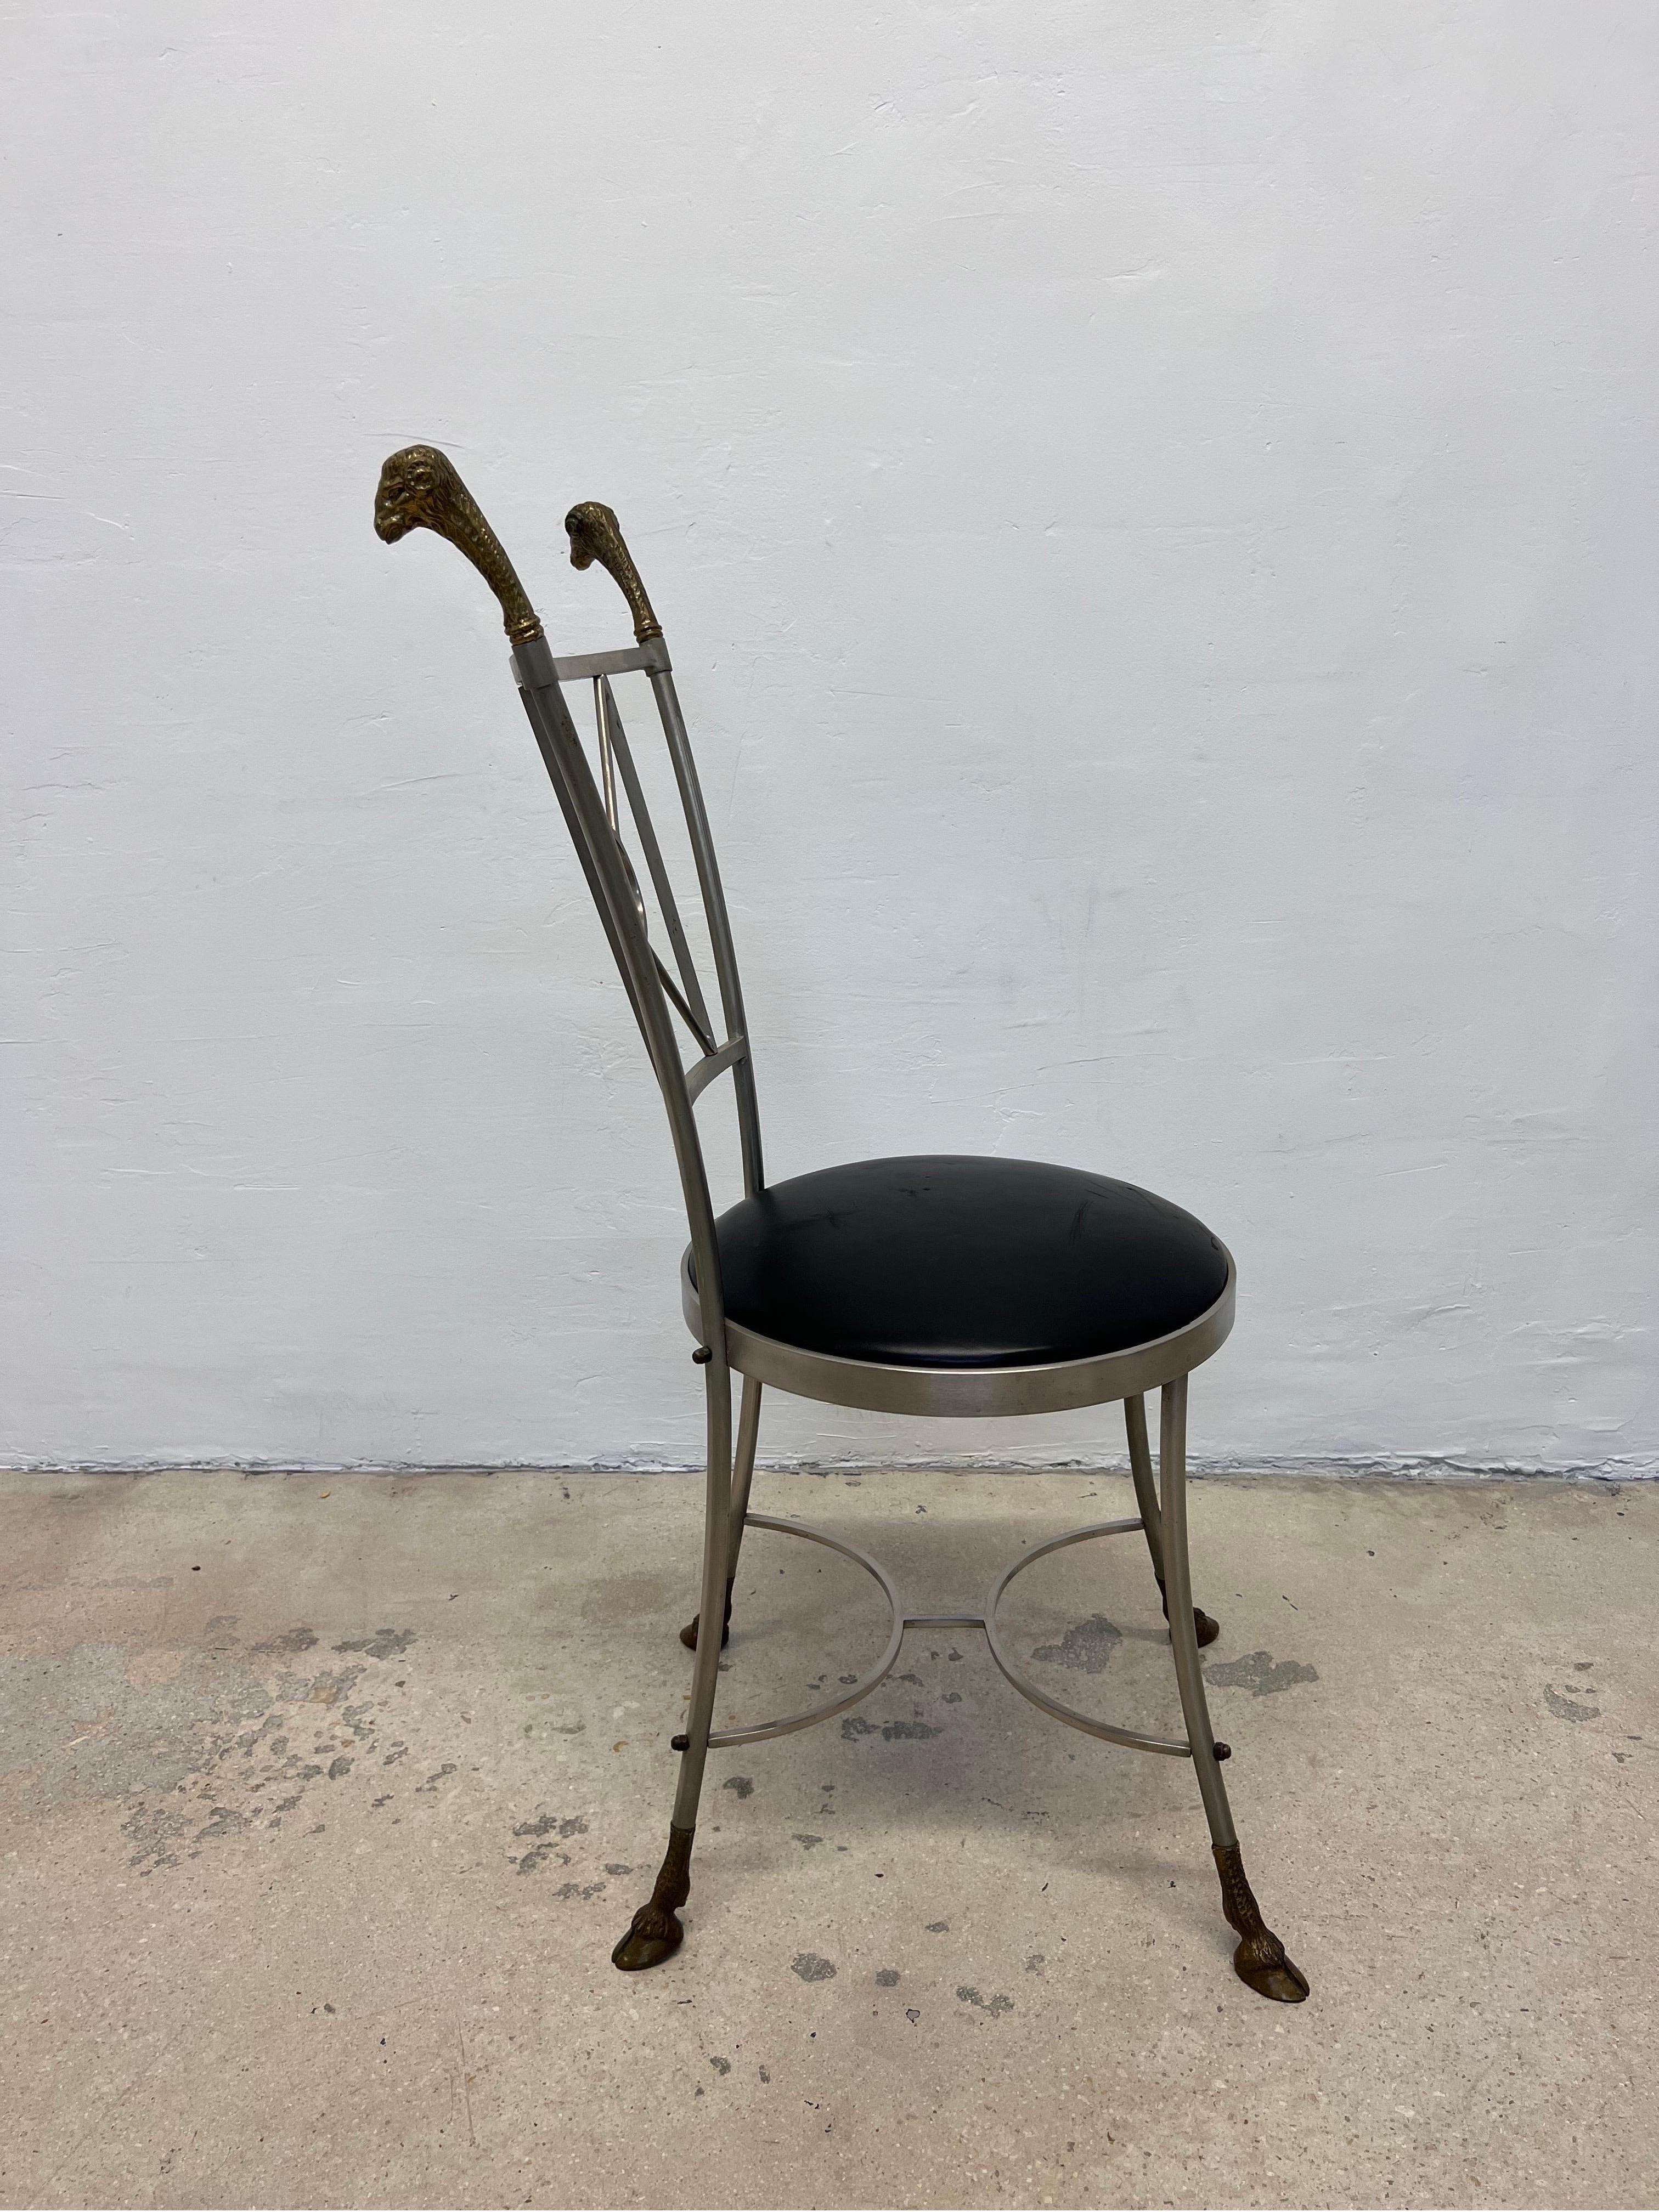 Italian Maison Jansen Style Rams Head and Steel Chair with Leather Seat